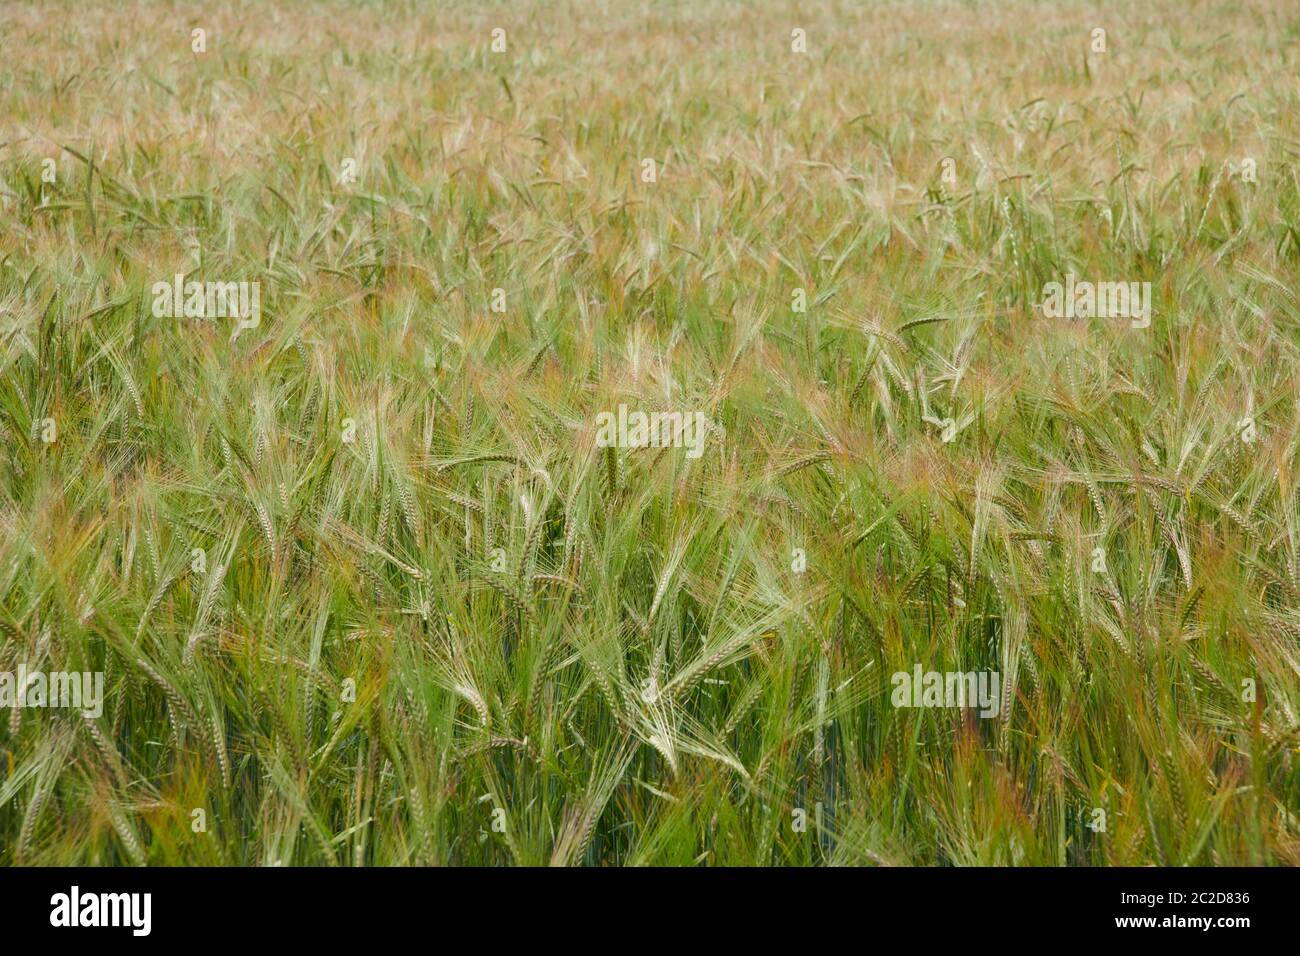 Common wheat (Triticum aestivum) or bread wheat growing in the summer sunshine, East Yorkshire, England, UK, GB. Stock Photo